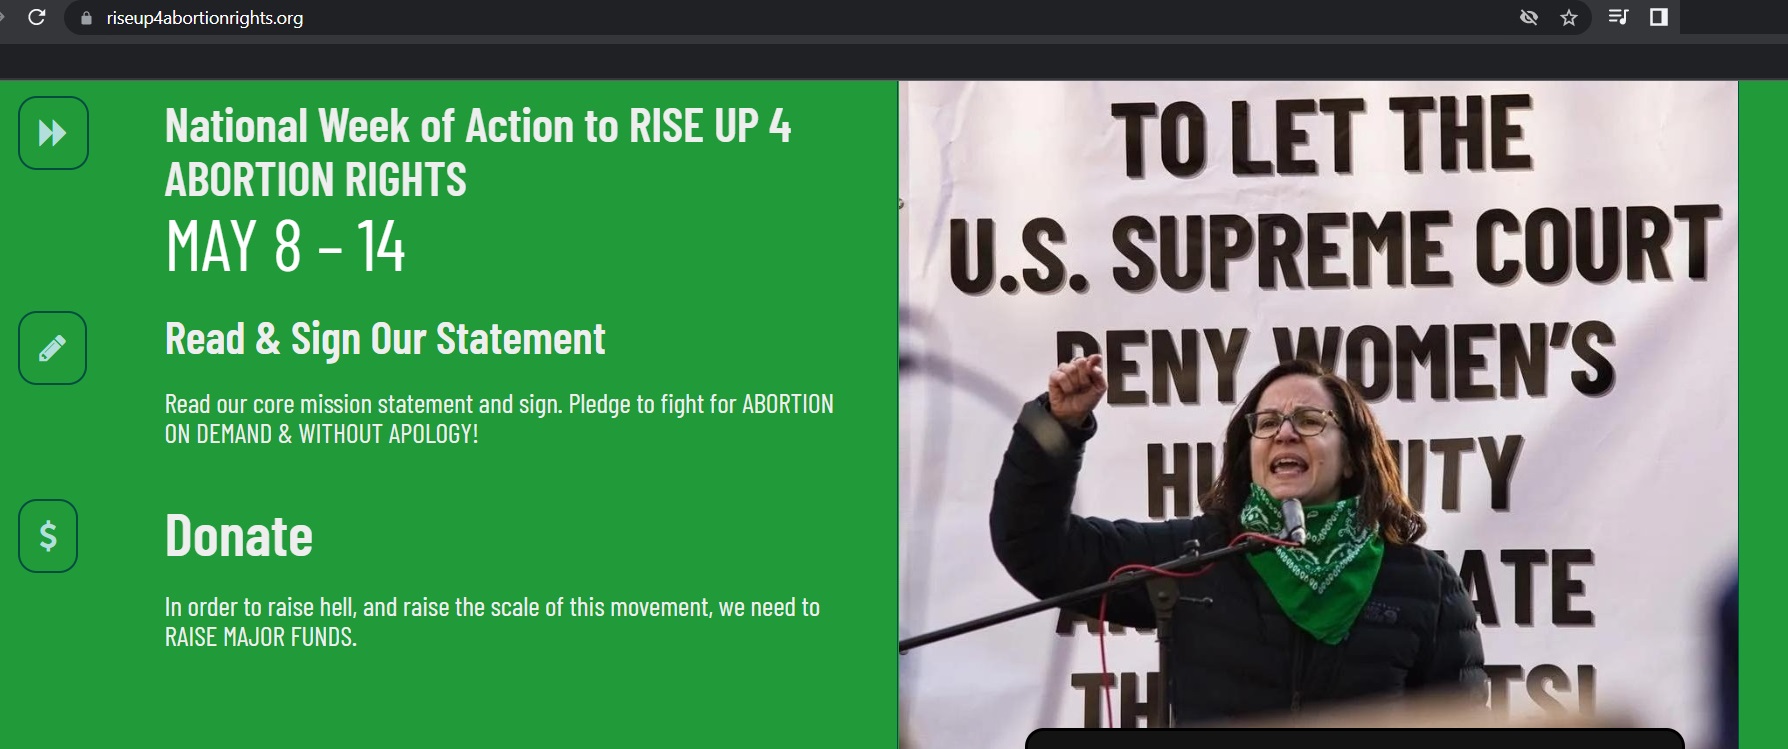 Rise Up for Abortion Rights features abortion extremist Sunsara Taylor